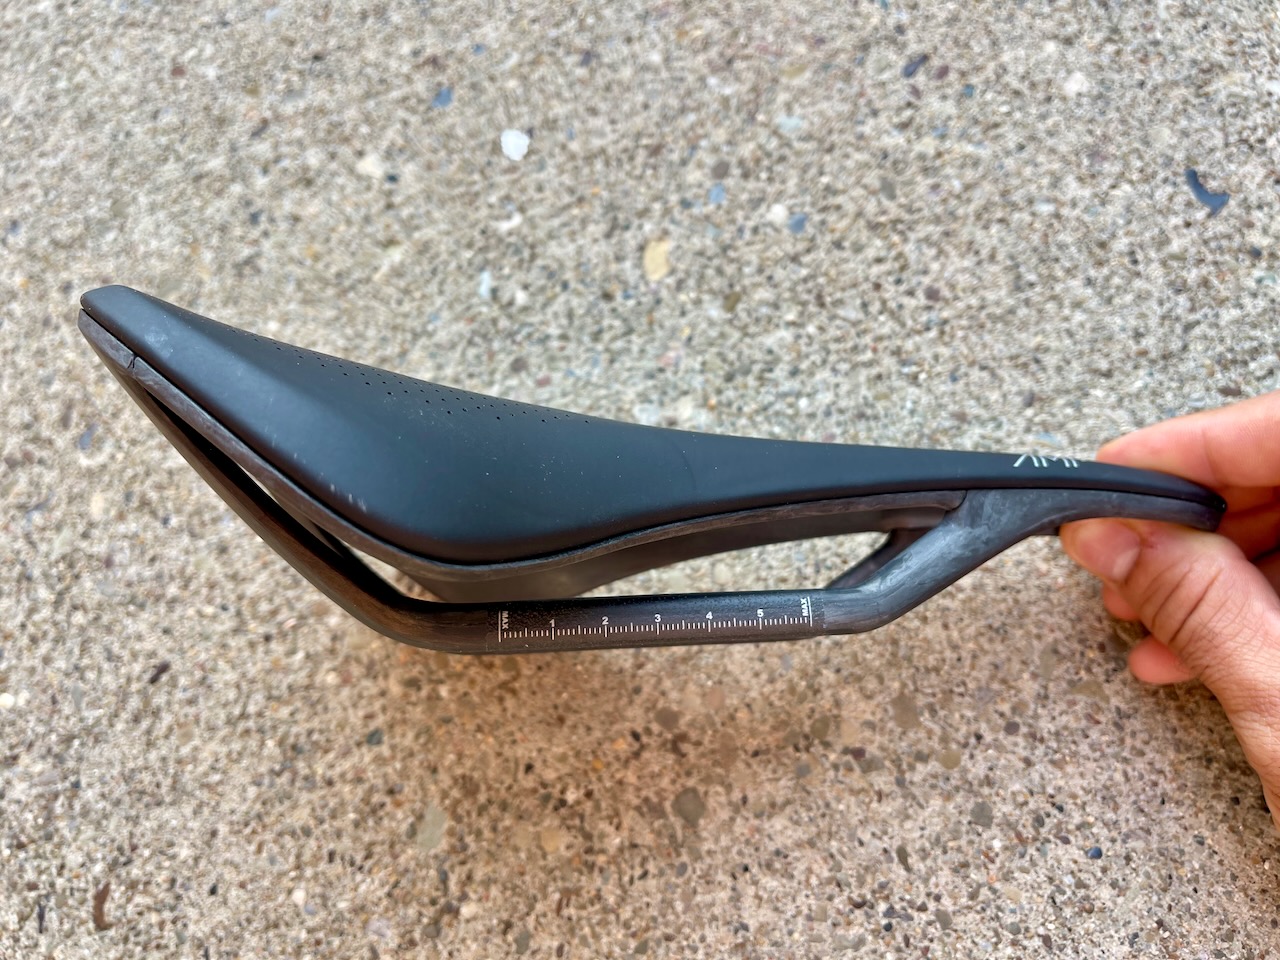 CADEX Amp saddle review in hand